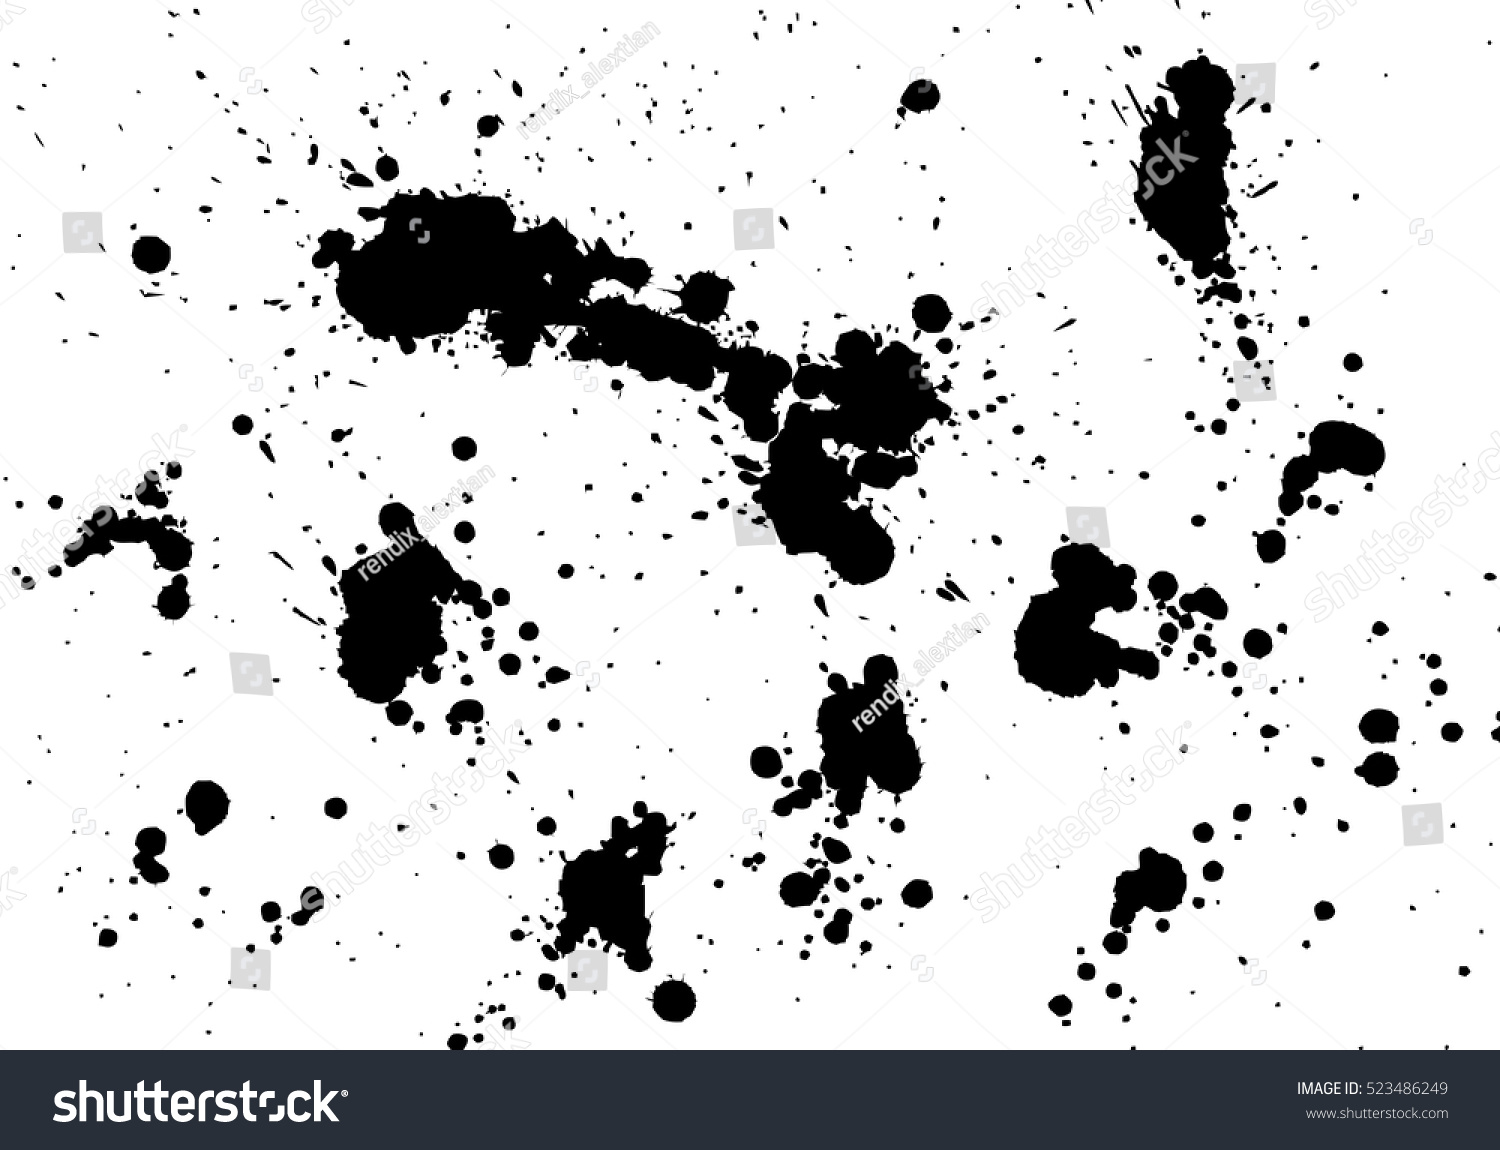 Black Splashes Hand Made Tracing Sketch Stock Vector (Royalty Free ...